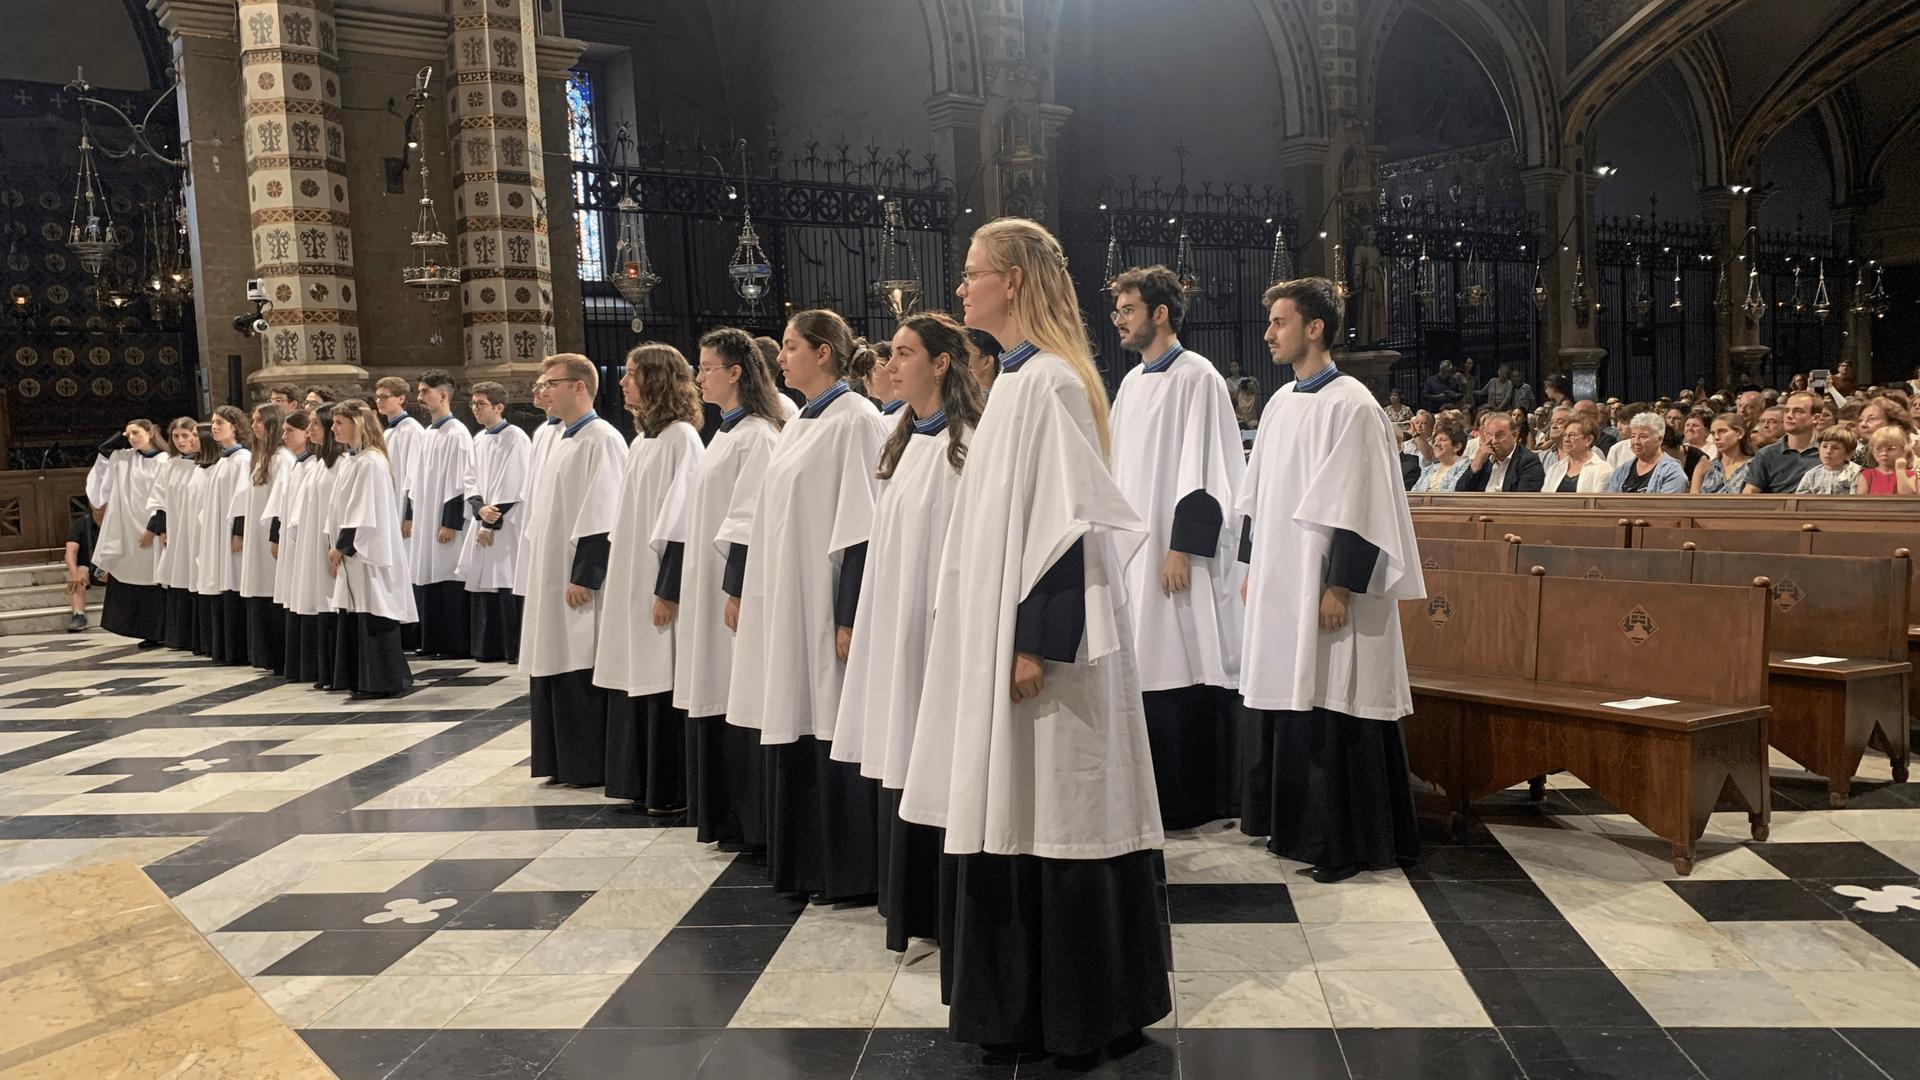 Montserrat Abbey’s mixed Escoliana choir has young women and men. They’ll sing the liturgy one weekend a month, so that the regular all-boys choir can have some time off with family.